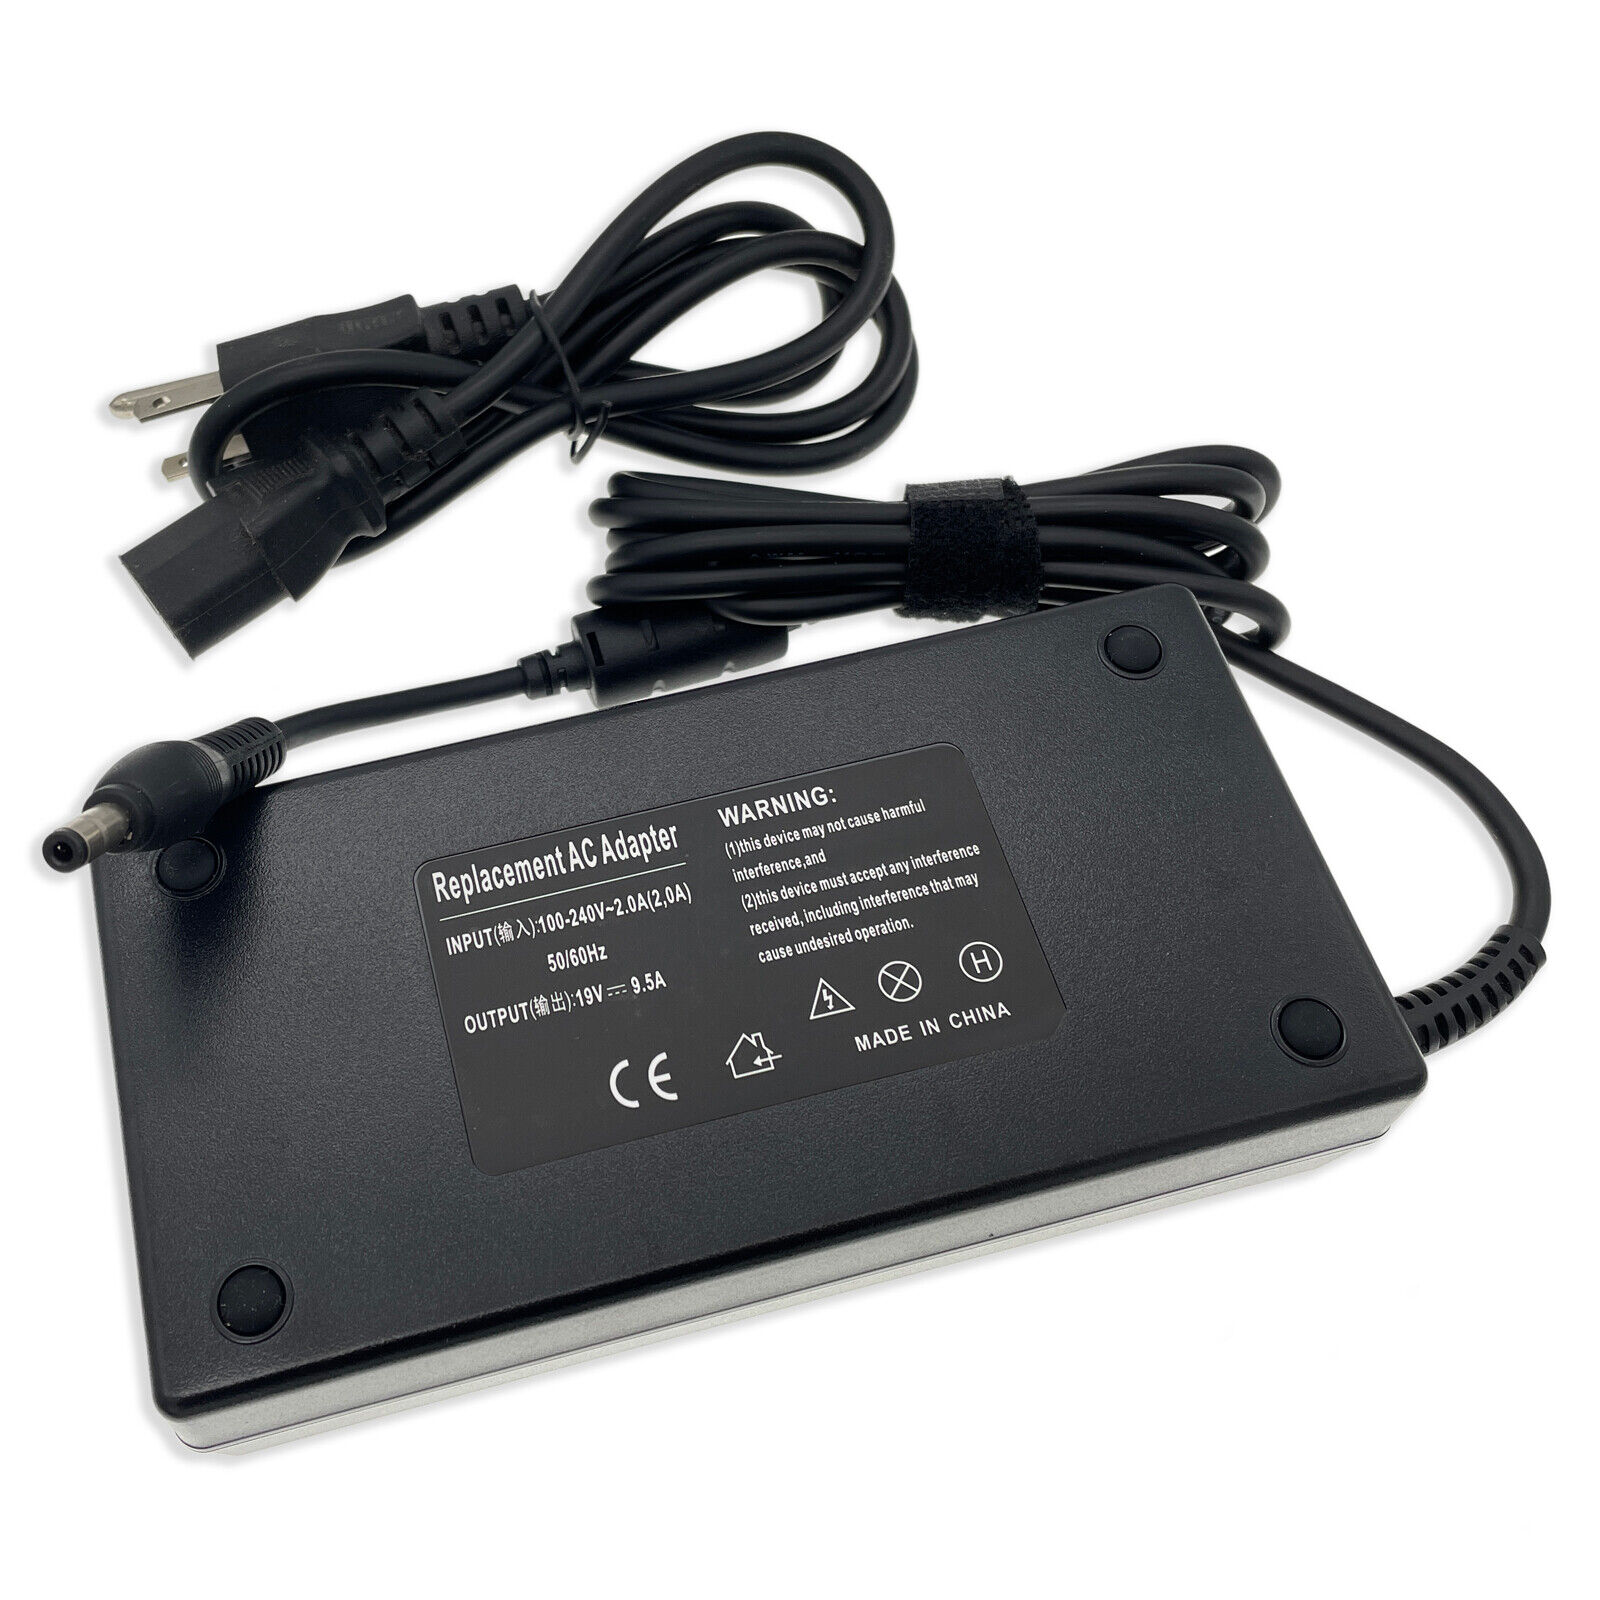 180W AC Adapter Power Supply for Asus G750JX-T4199H/i7-4700HQ ADP-180MB F Laptop